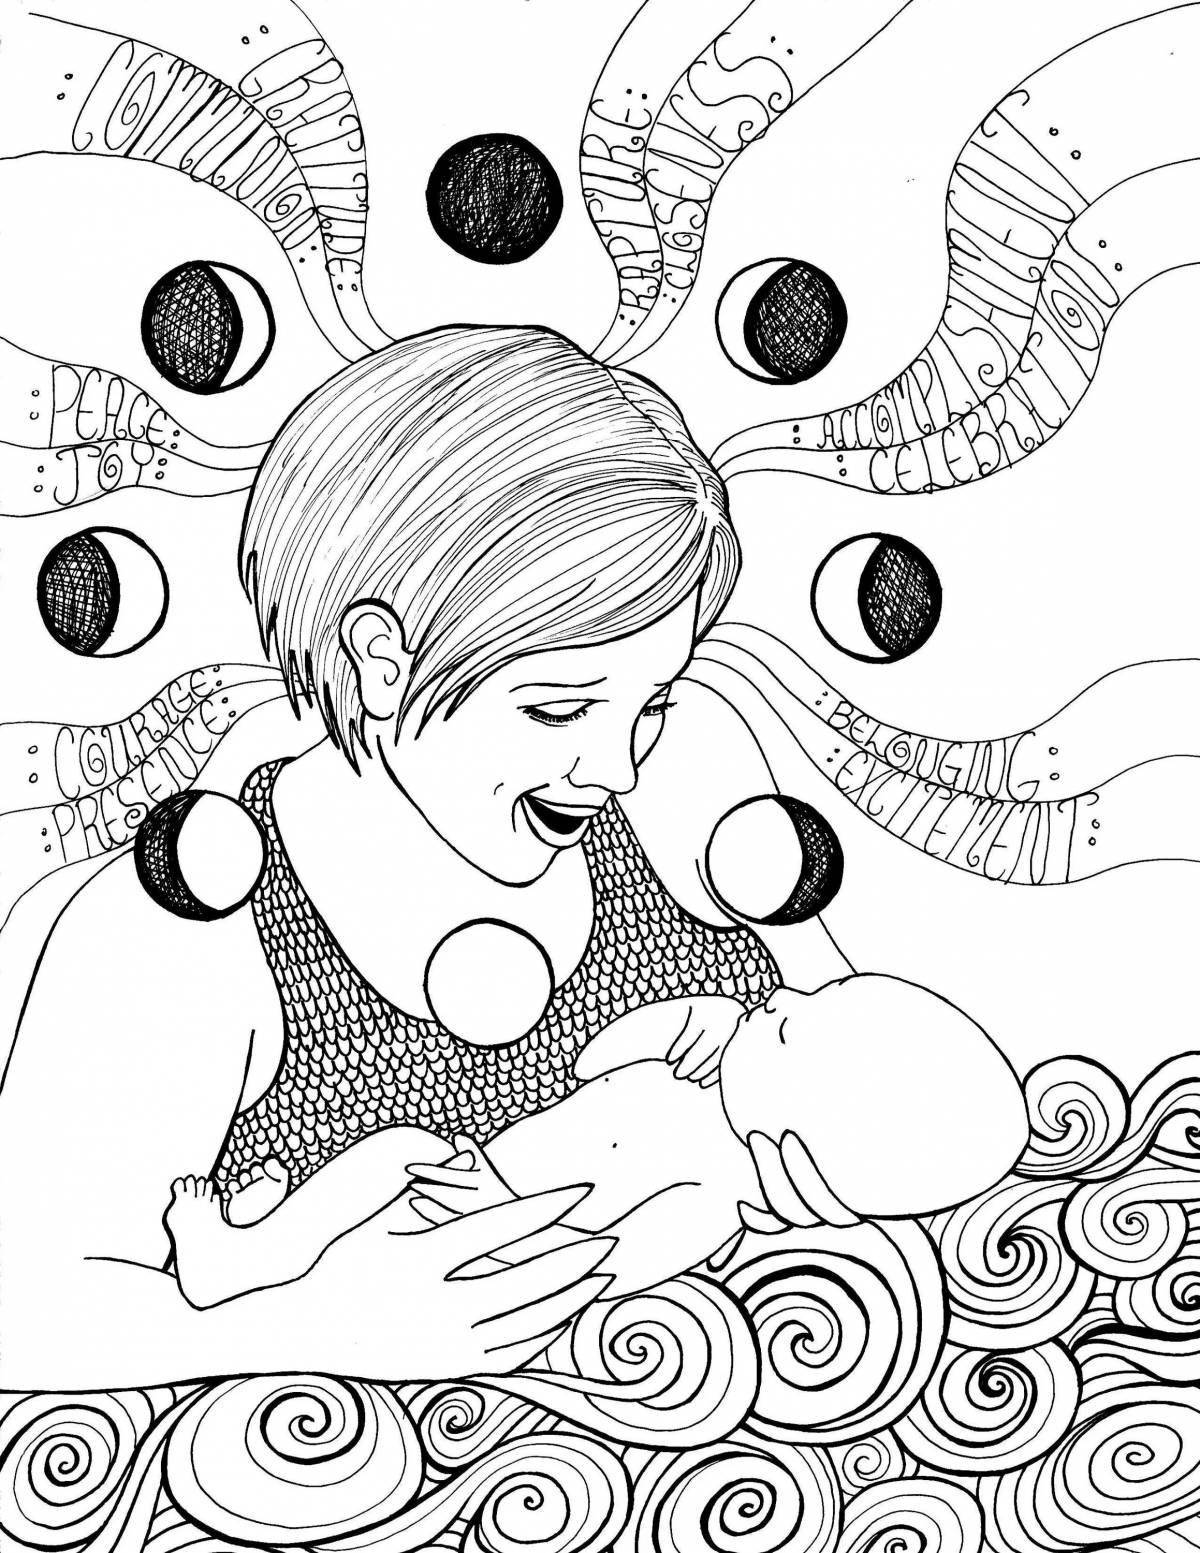 Inspirational pregnancy coloring book